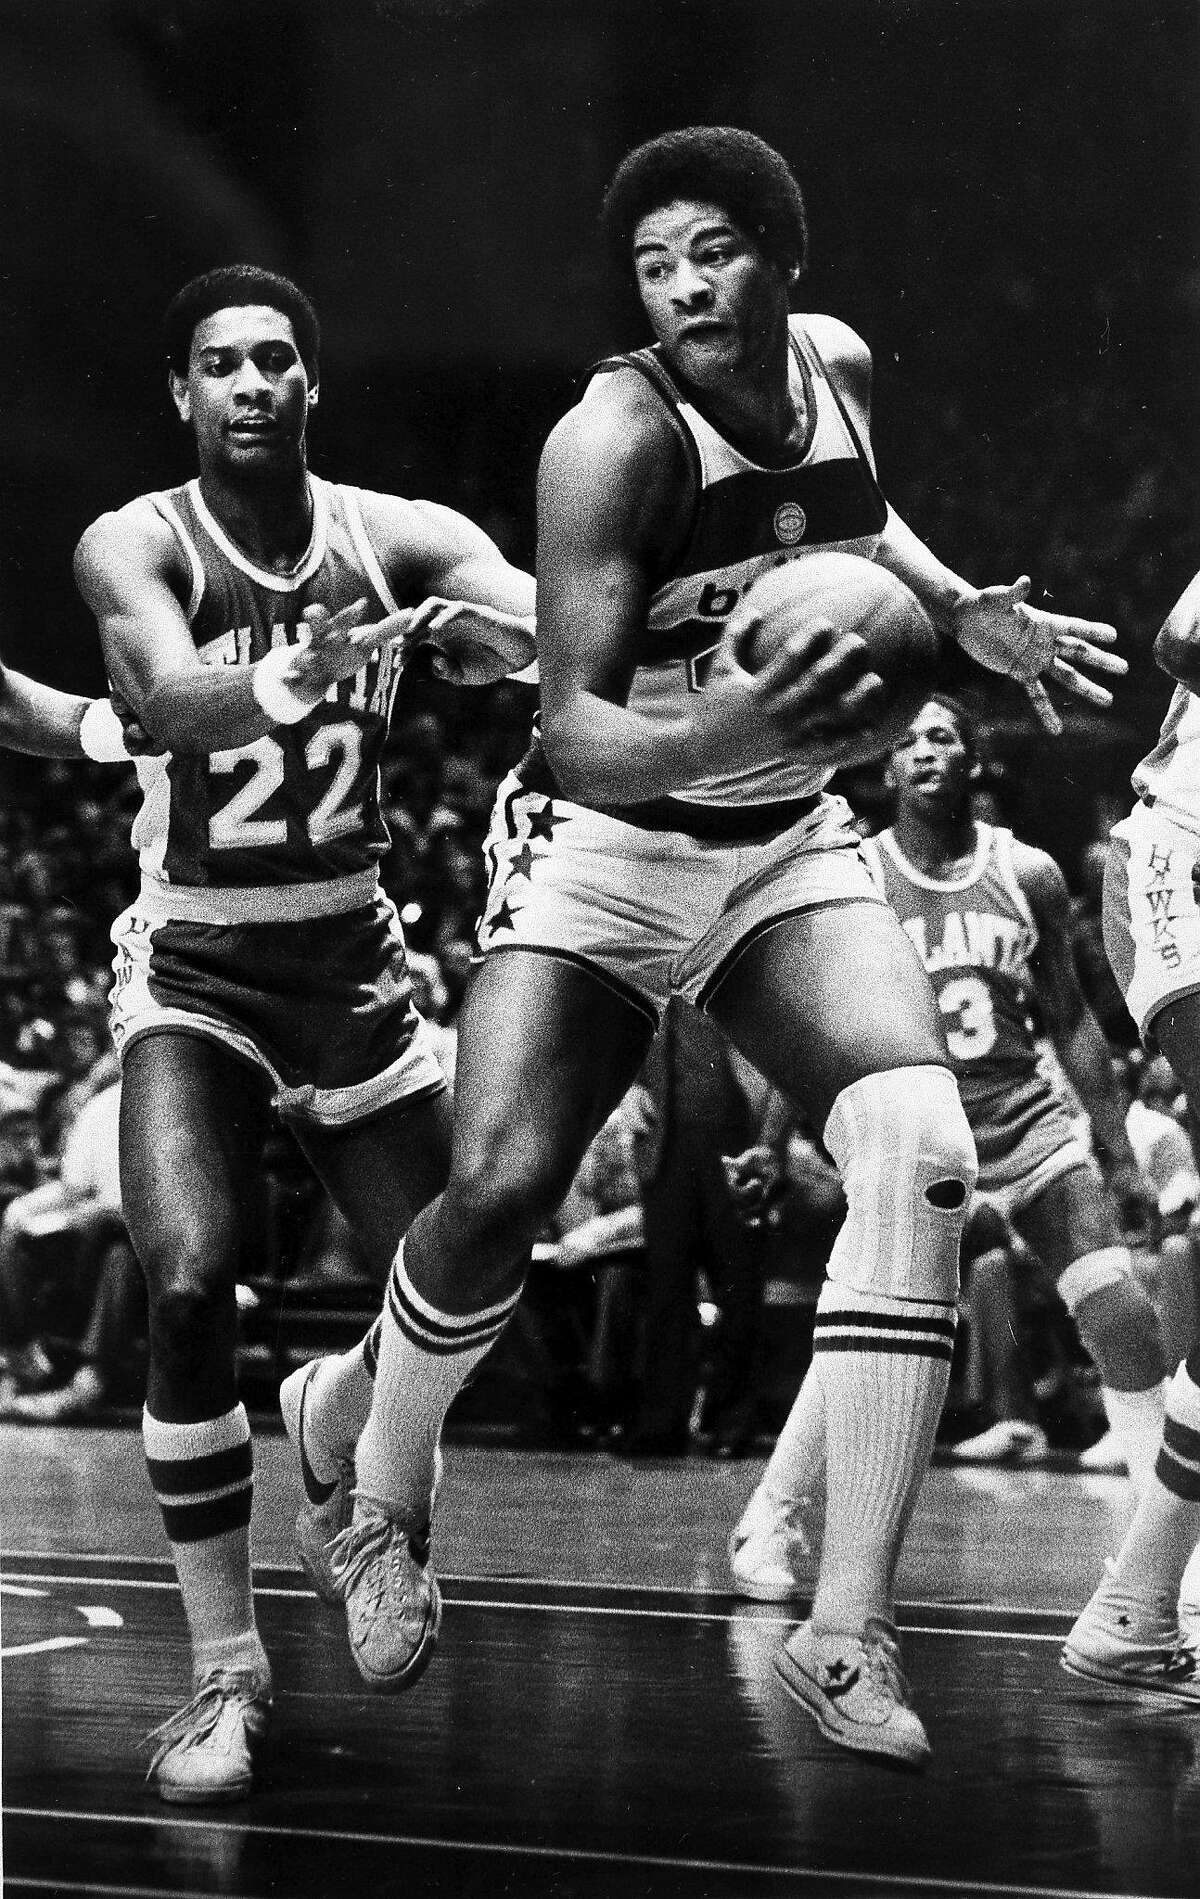 FILE - In this Jan . 30, 1979, file photo, Wes Unseld of the Washington Bullets takes in an offensive rebound against John Drew (22) of the Atlanta Hawks during the first half of an NBA basketball game in Landover, Md. Unseld, the workmanlike Hall of Fame center who led Washington to its only NBA championship and was chosen one of the 50 greatest players in league history, died Tuesday, June 2, 2020, after a series of health issues, most recently pneumonia. He was 74. (AP Photo/FIle)